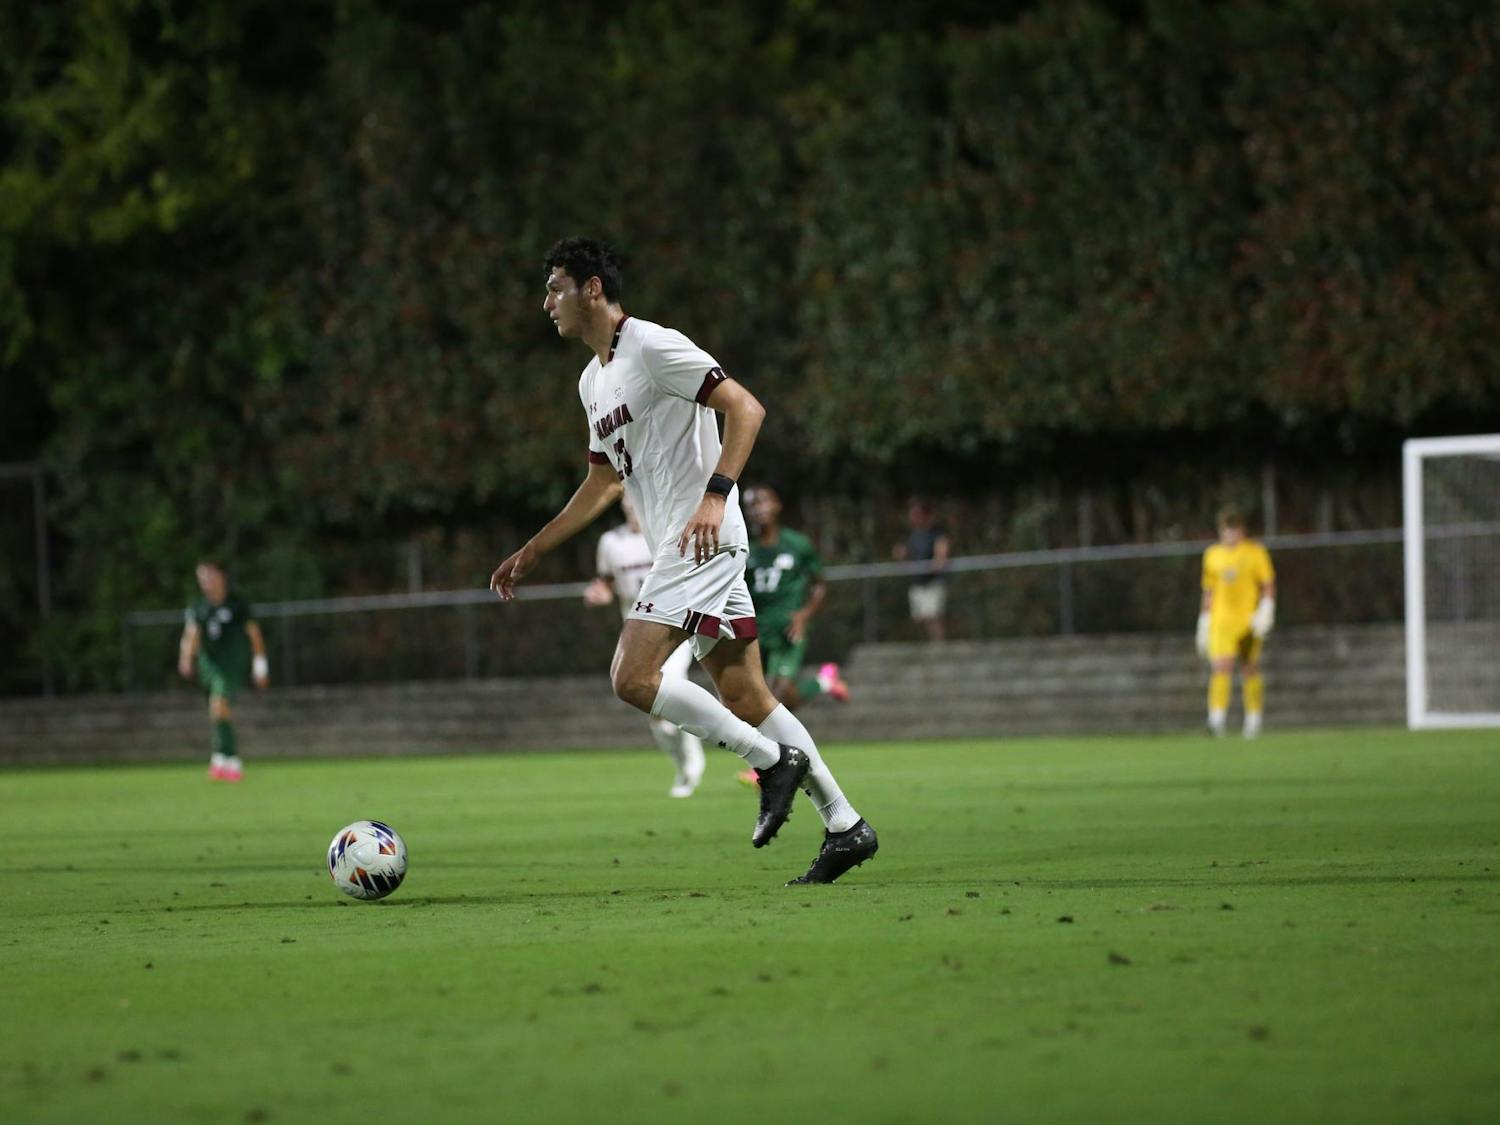 Junior forward Harrison Myring runs to pass to a teammate near the goal during a game against Jacksonville University on Oct. 3, 2023. The Gamecocks defeated the Dolphins 1-0.